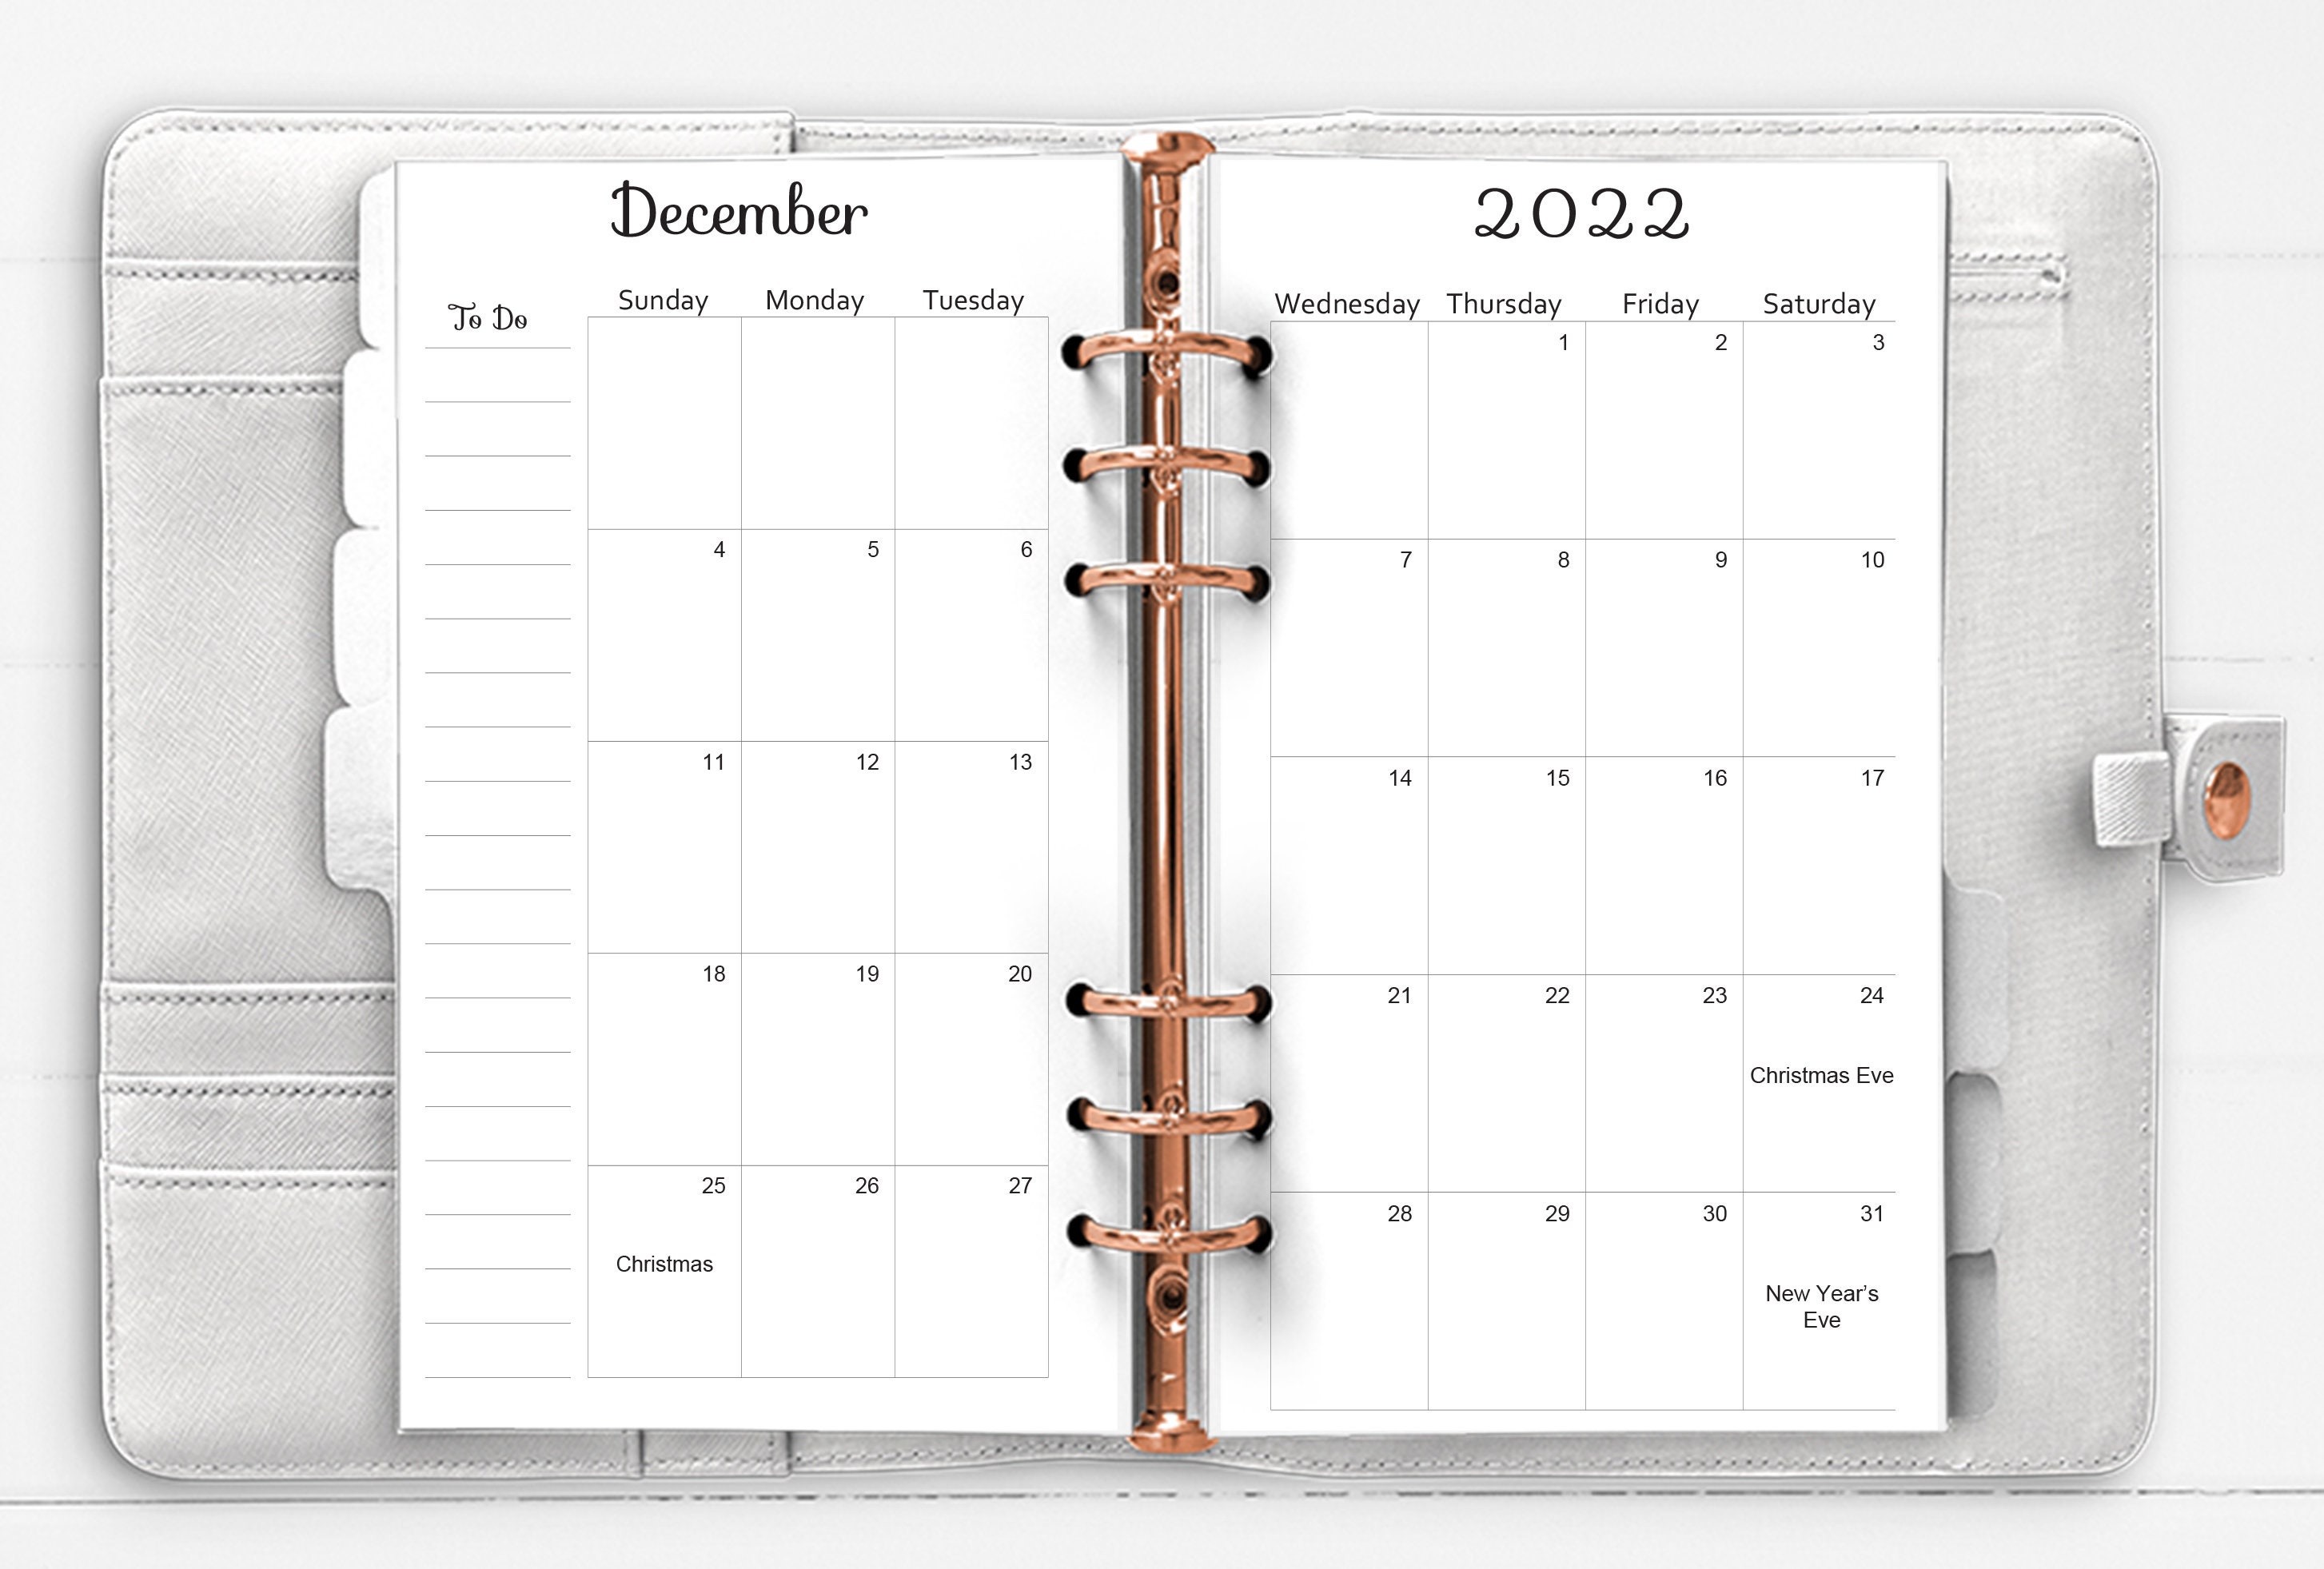 164 Sheets 6 Hole Budget System Refill 37.4 x 66.93 Inch Classic Weekly  Monthly A6 Planner Inserts Personal Double Sided 6 Ring Planner Refill for